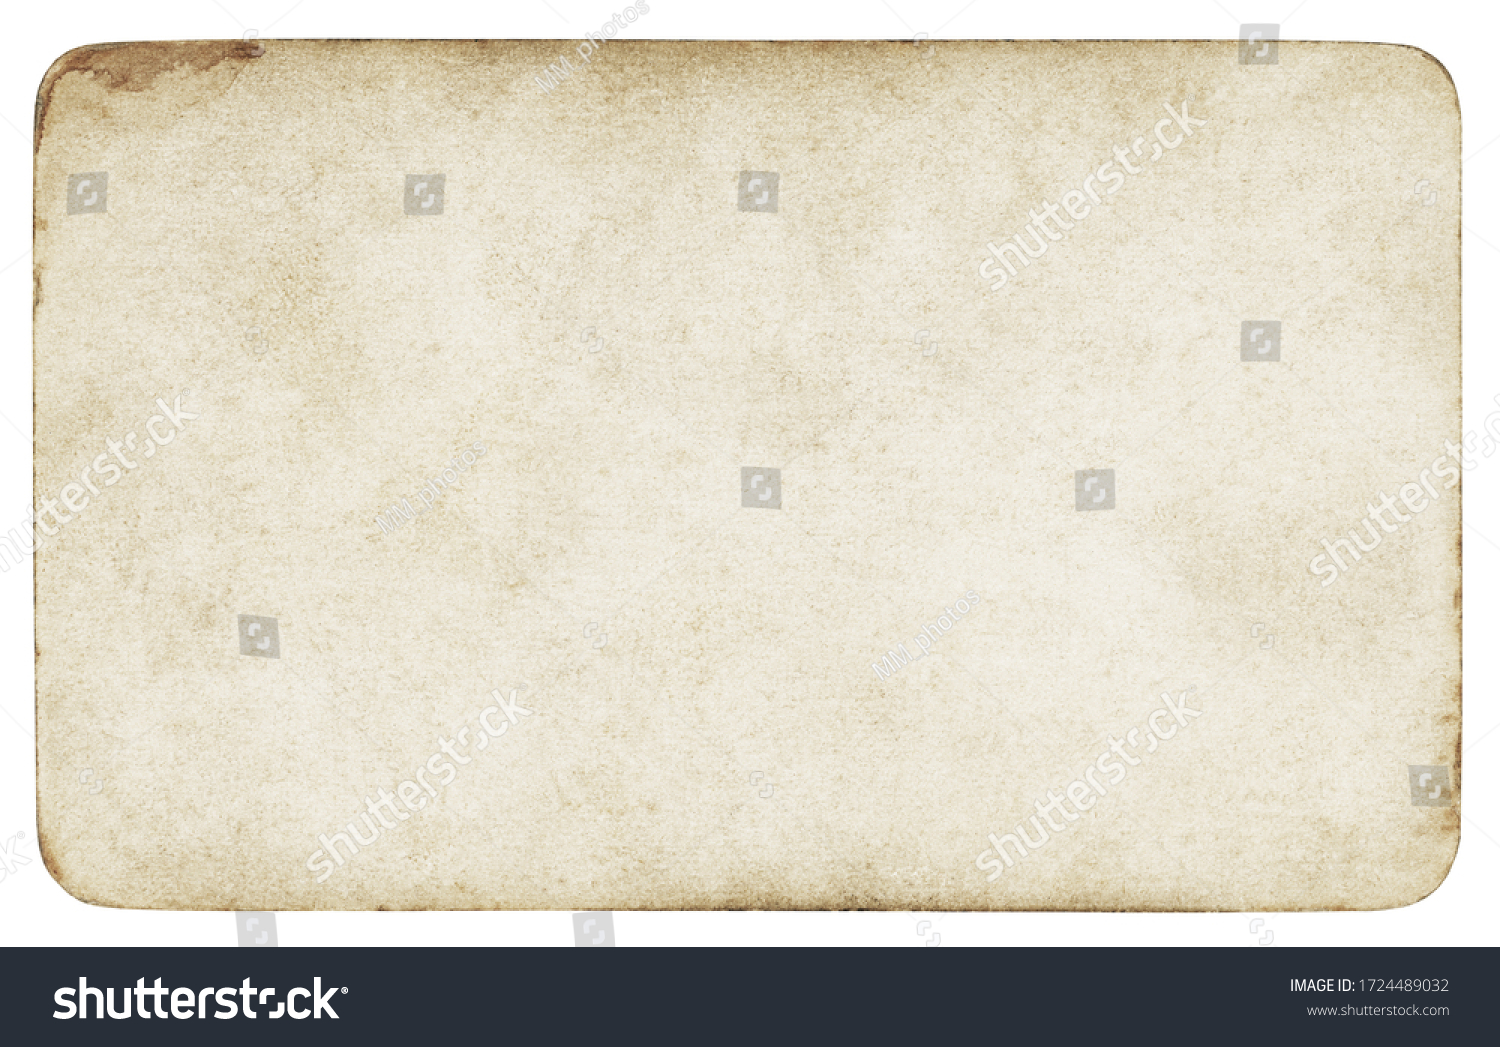 Vintage paper background isolated - (clipping path included)  #1724489032